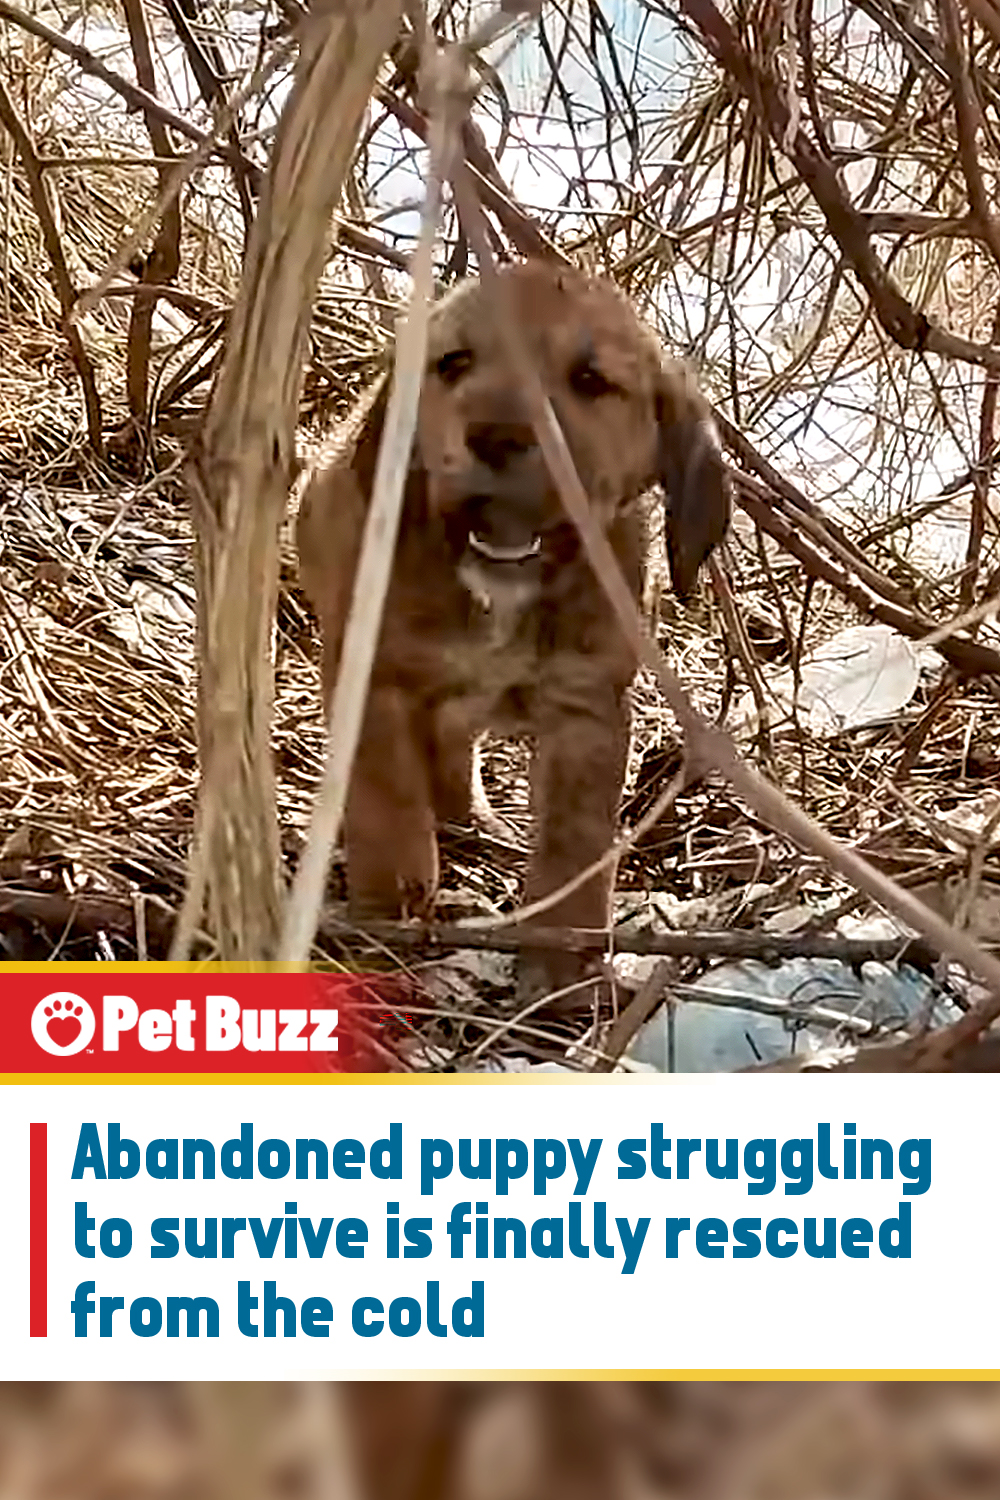 Abandoned puppy struggling to survive is finally rescued from the cold